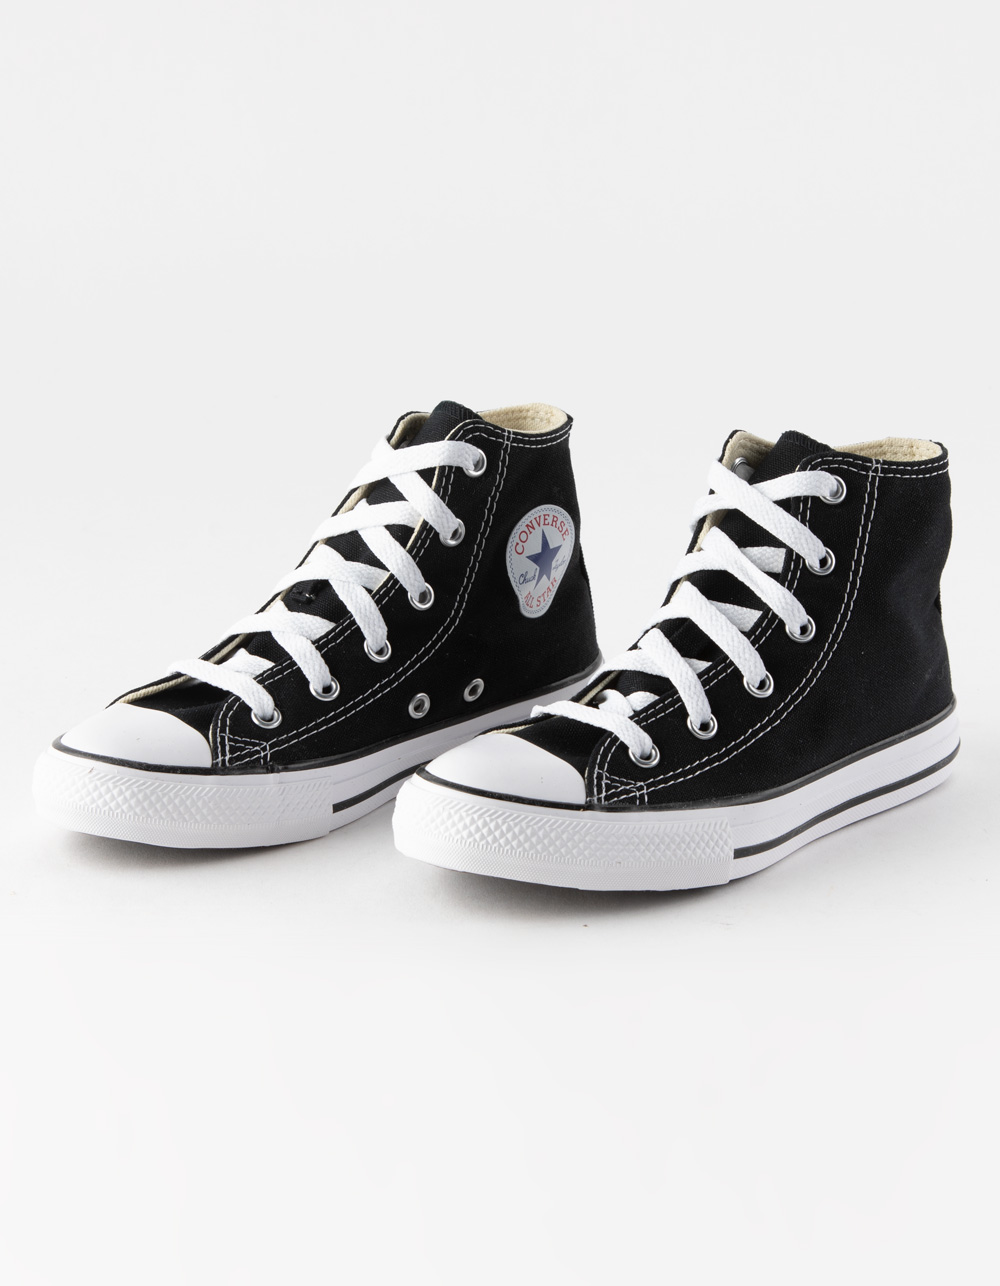 Converse Shoes & Converse Clothing | Tillys